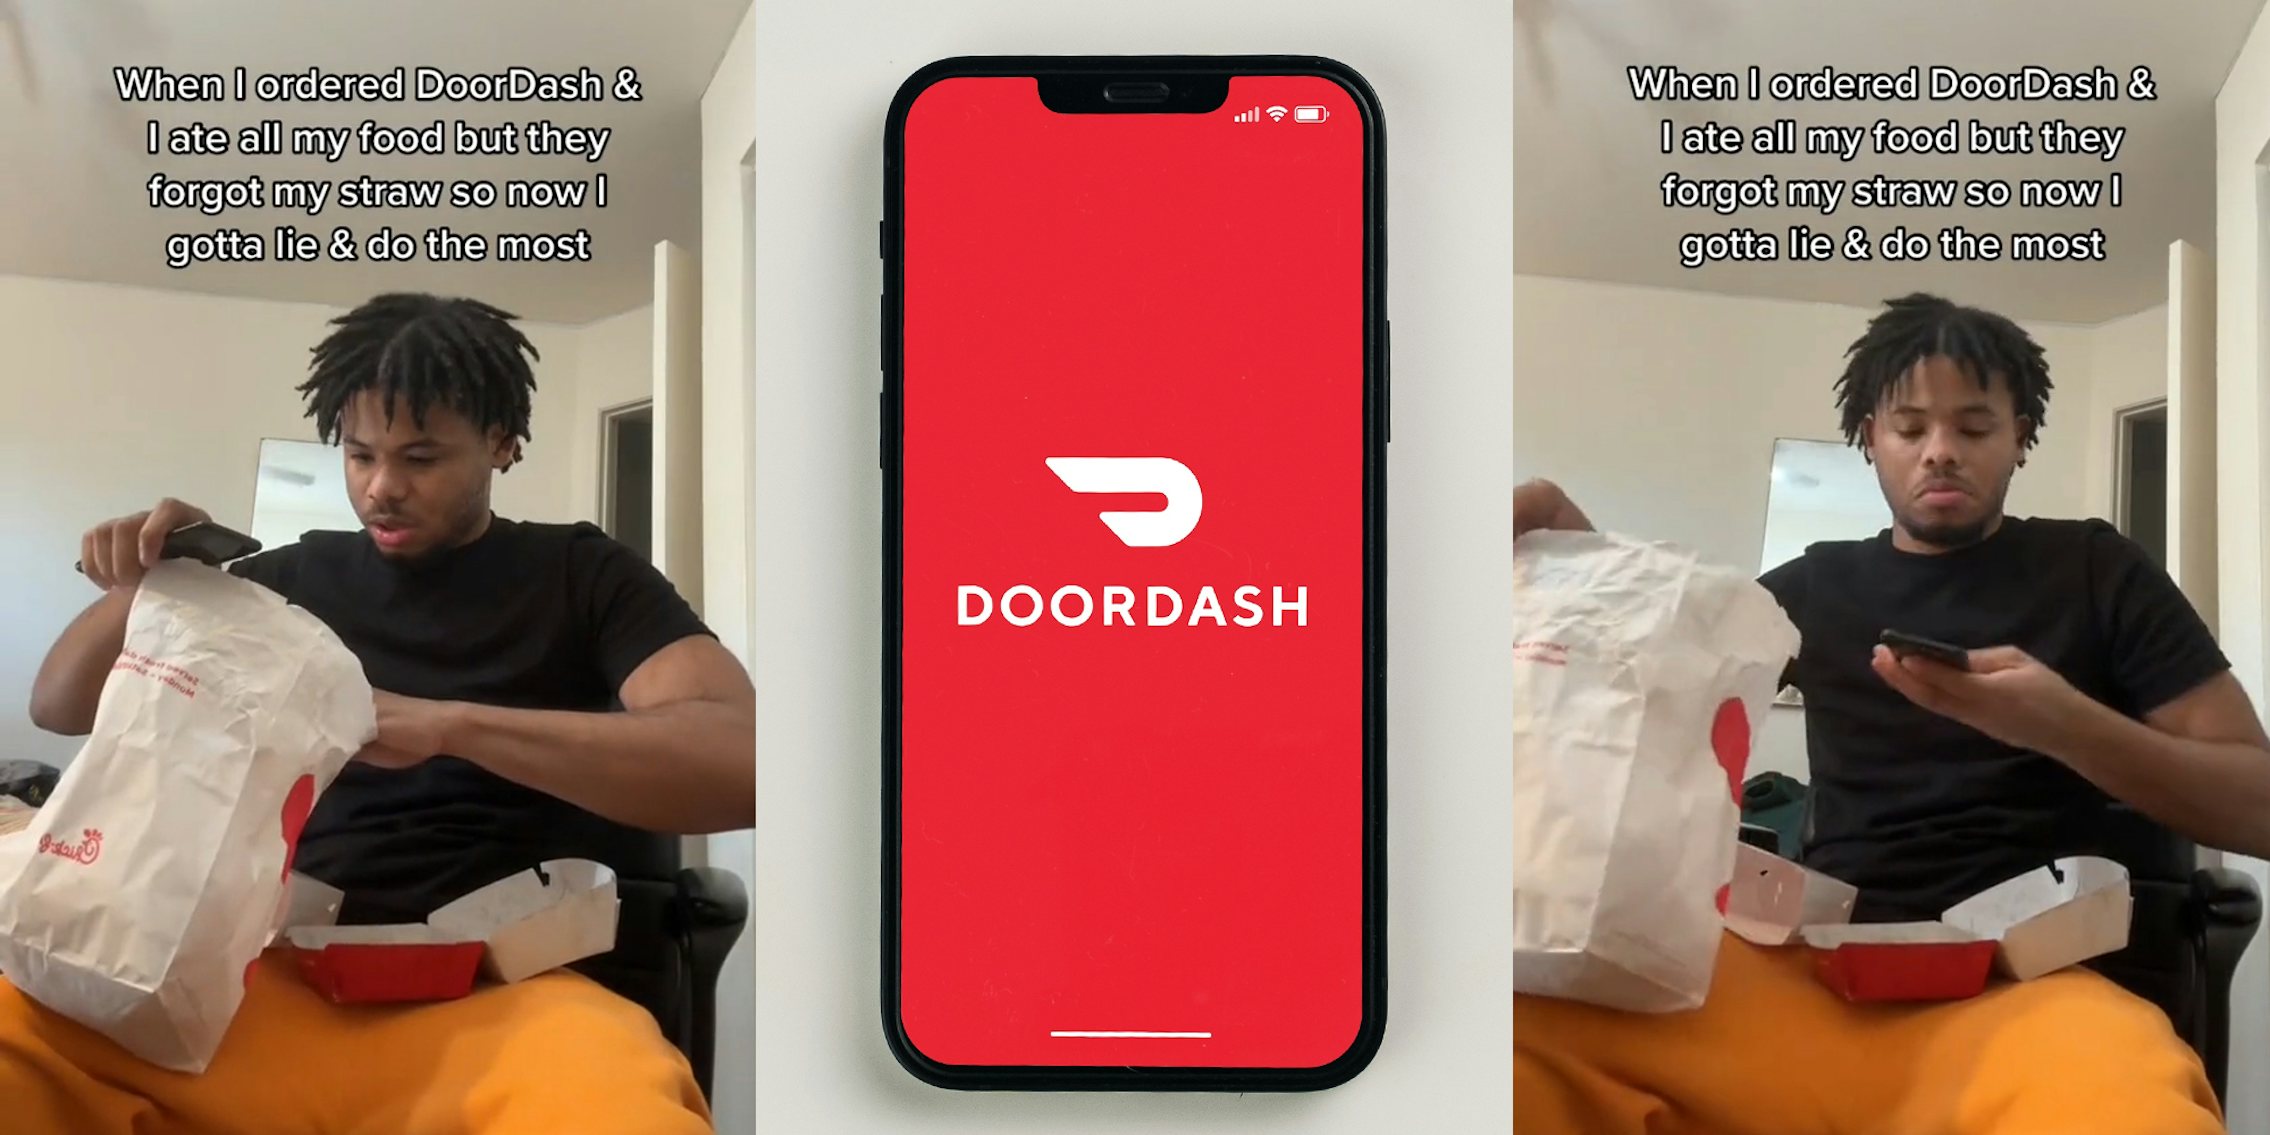 DoorDash customer with bag of food with caption 'When I ordered DoorDash & I ate all my food but they forgot my straw so now I gotta lie & do the most' (l) DoorDash on phone screen in front of light grey background (c) DoorDash customer with bag of food with caption 'When I ordered DoorDash & I ate all my food but they forgot my straw so now I gotta lie & do the most' (r)